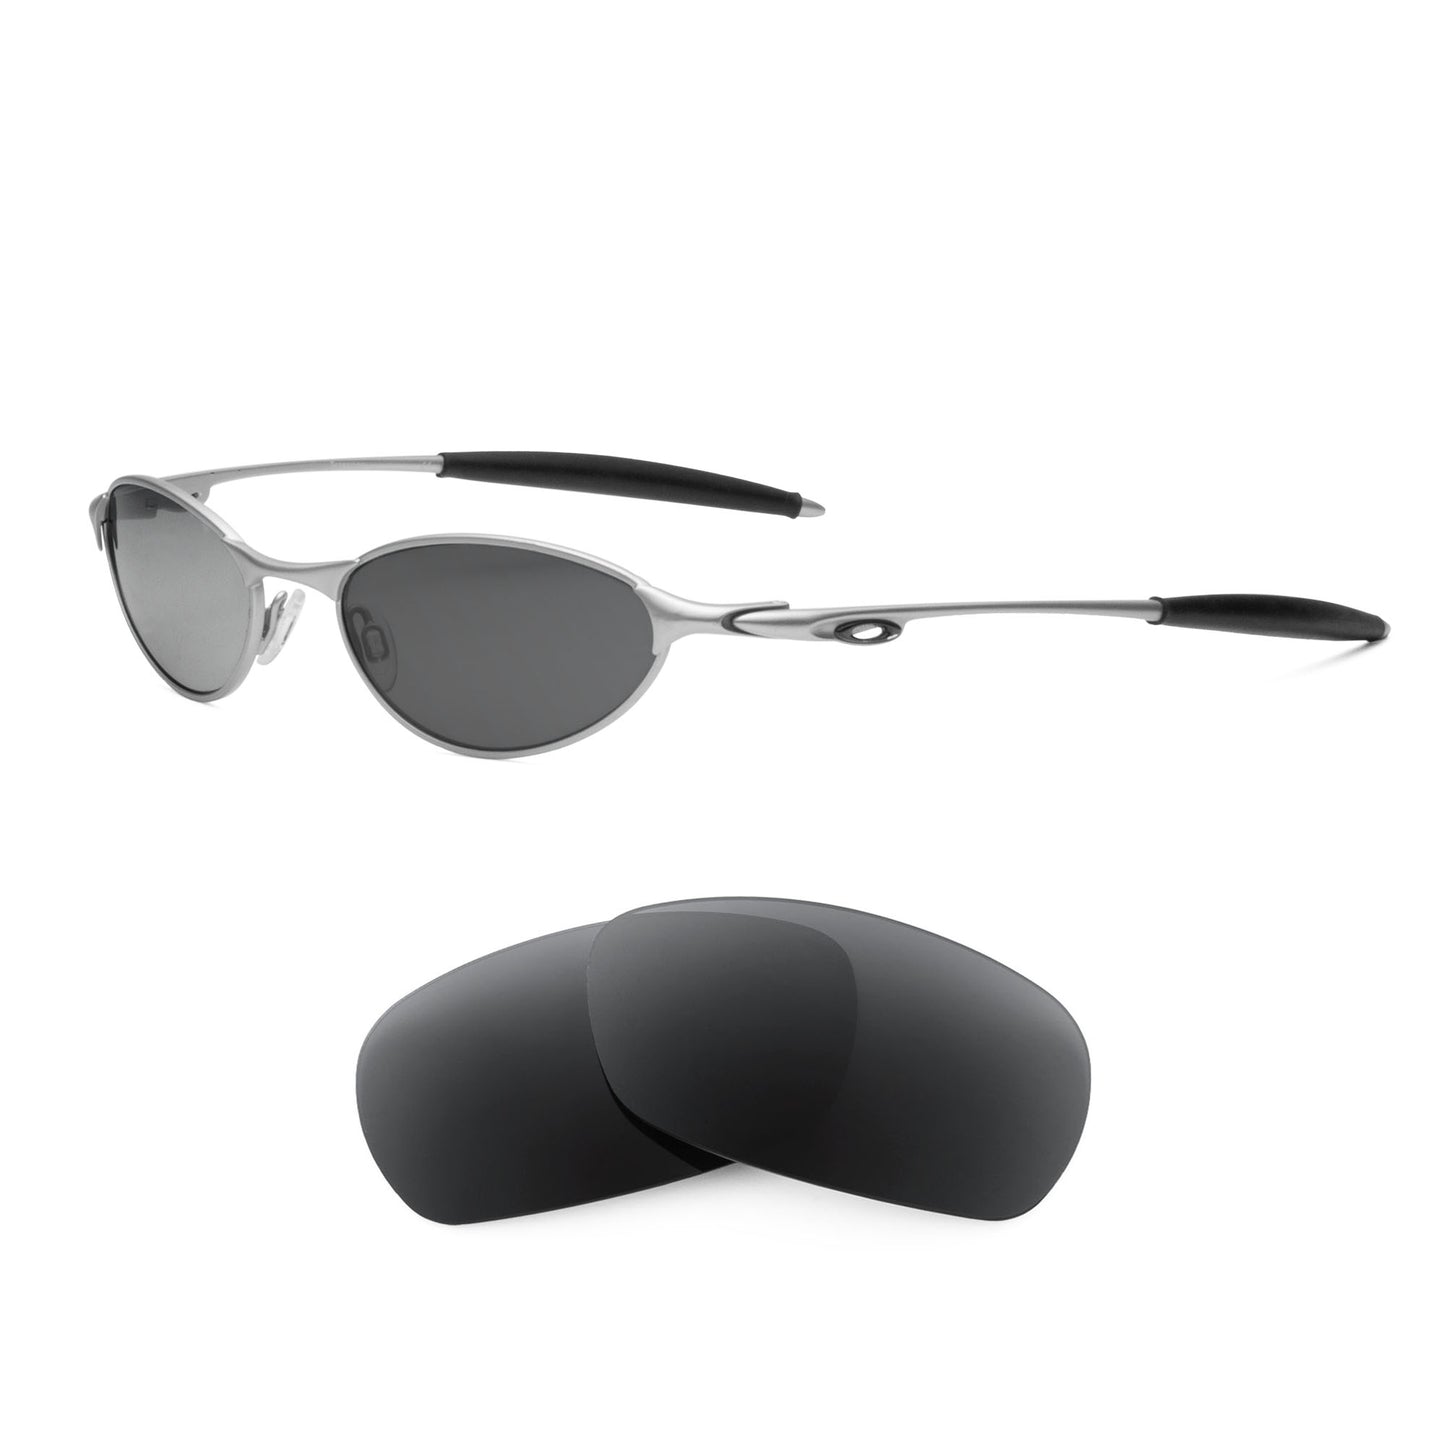 Oakley Teaspoon sunglasses with replacement lenses